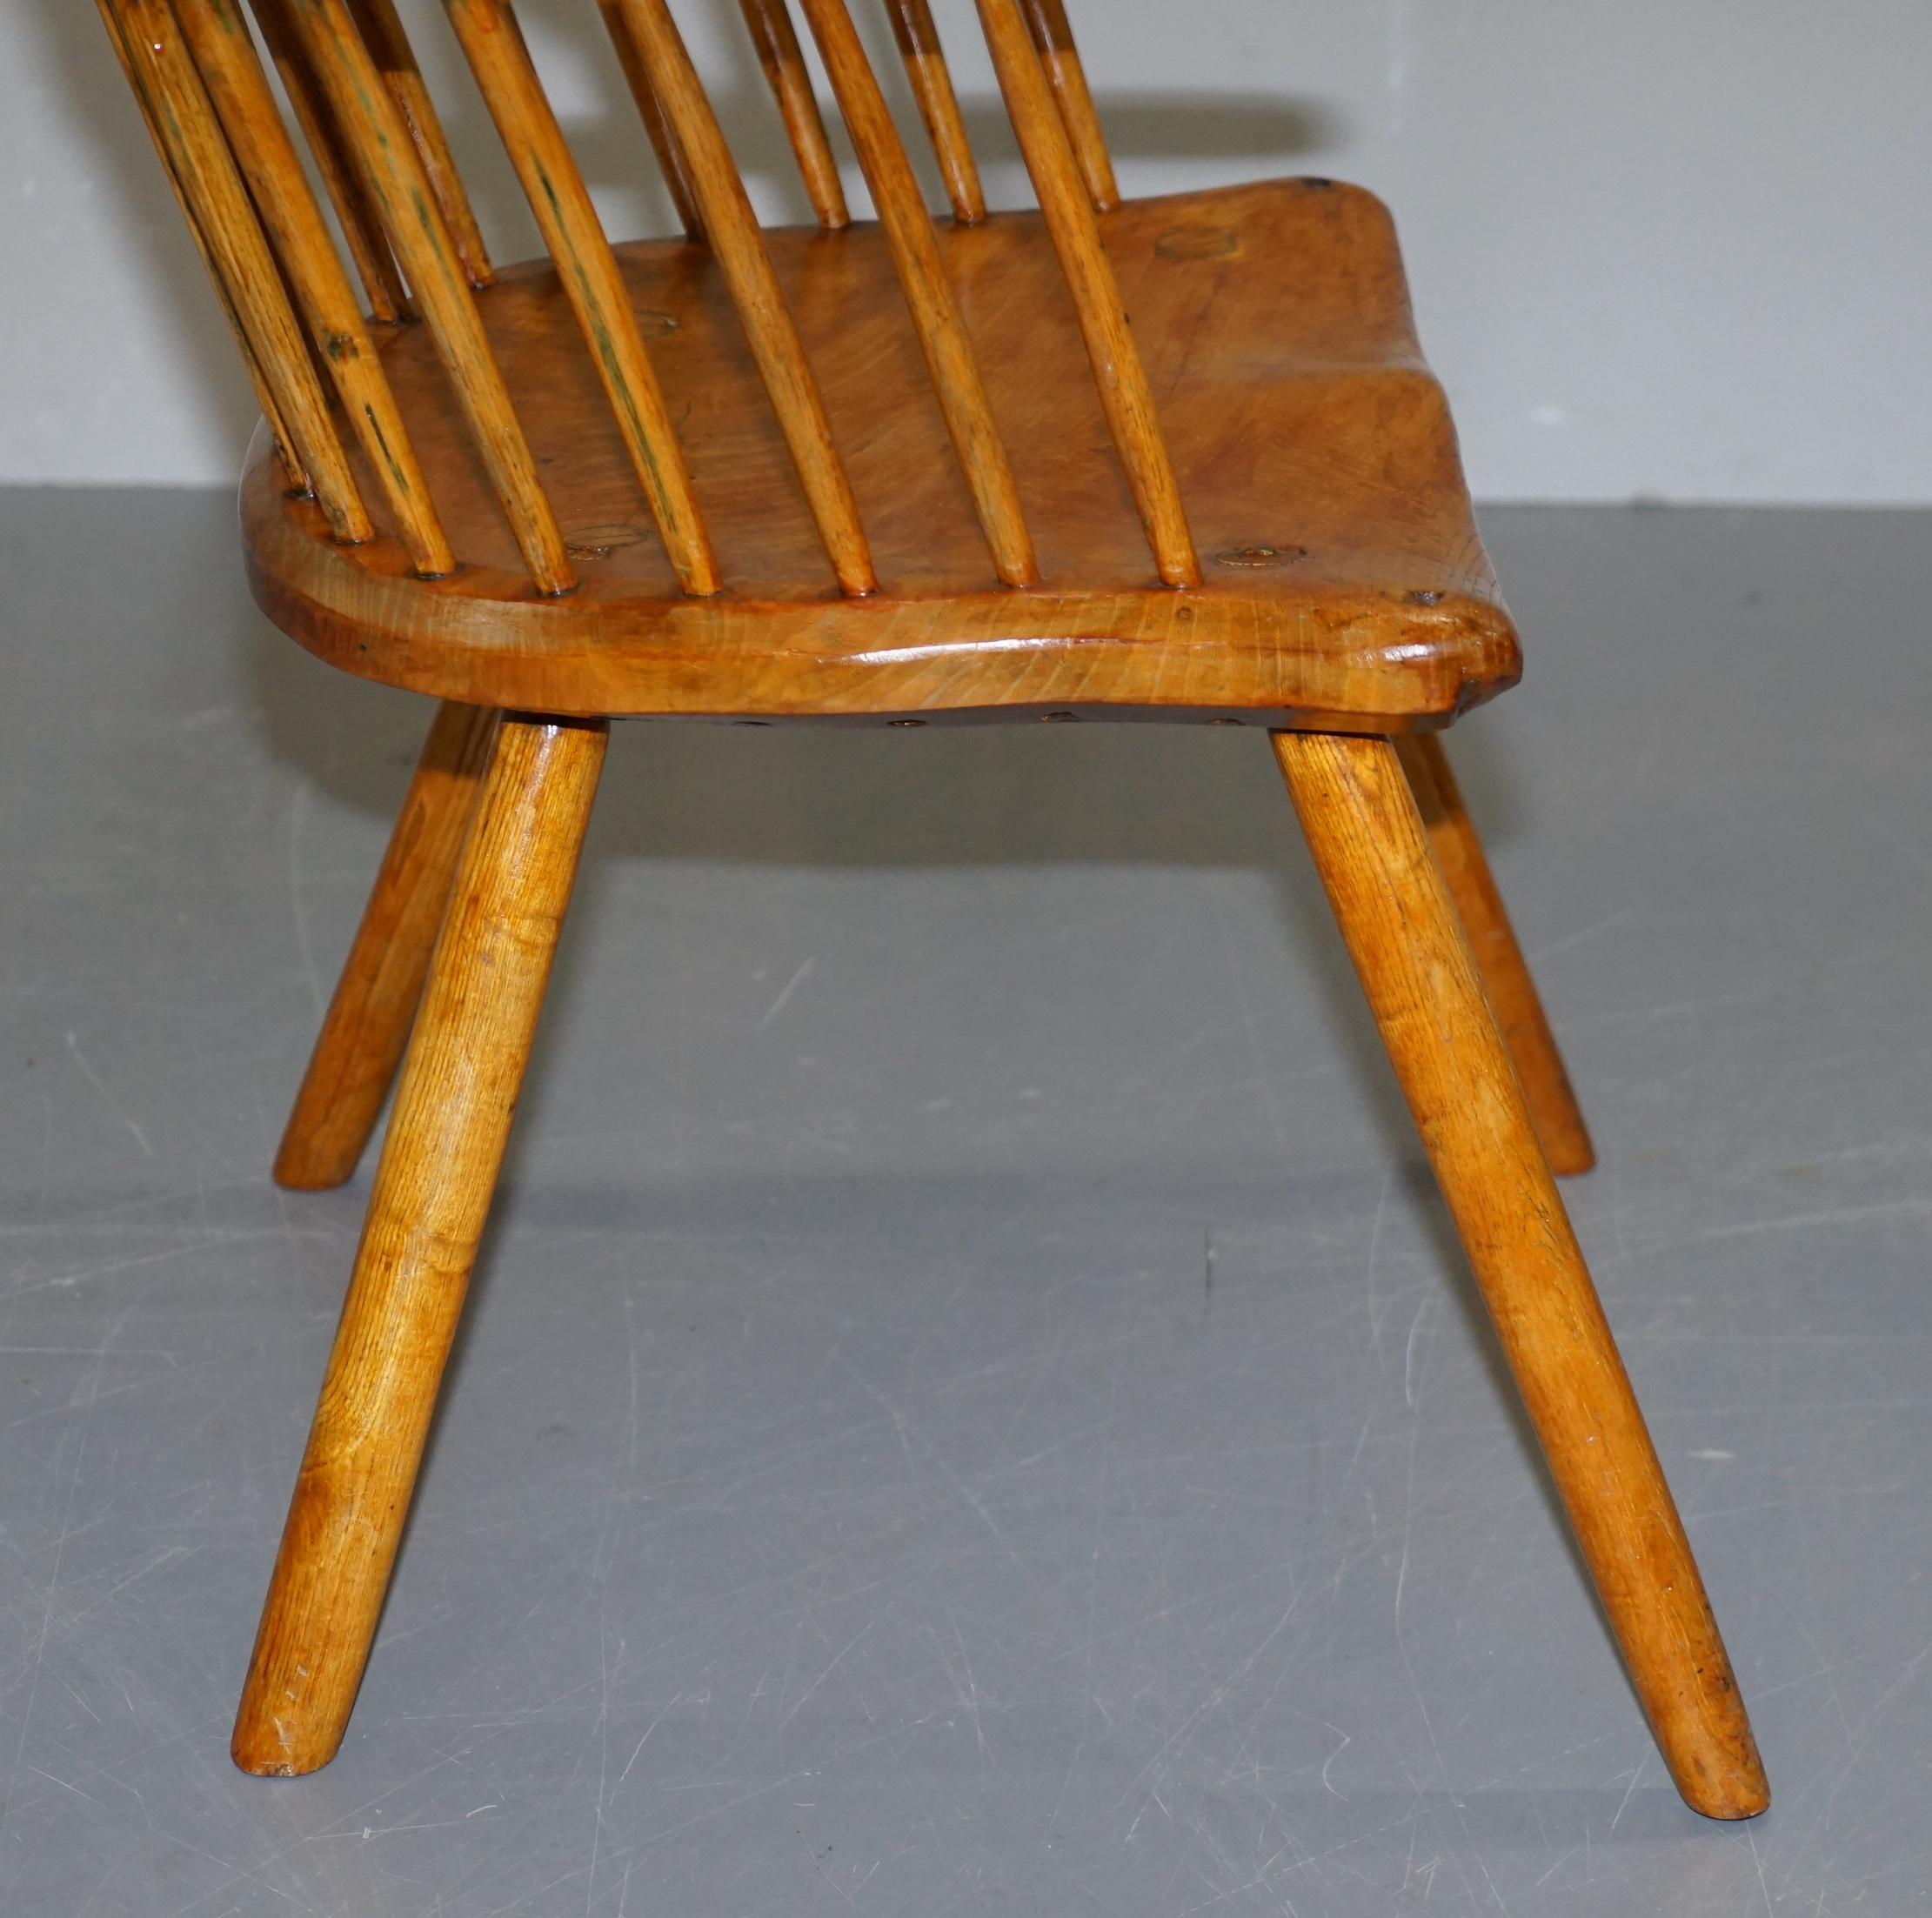 Stunning 18th Century Yew Wood Windsor Armchair Primate Design Stick Back For Sale 5